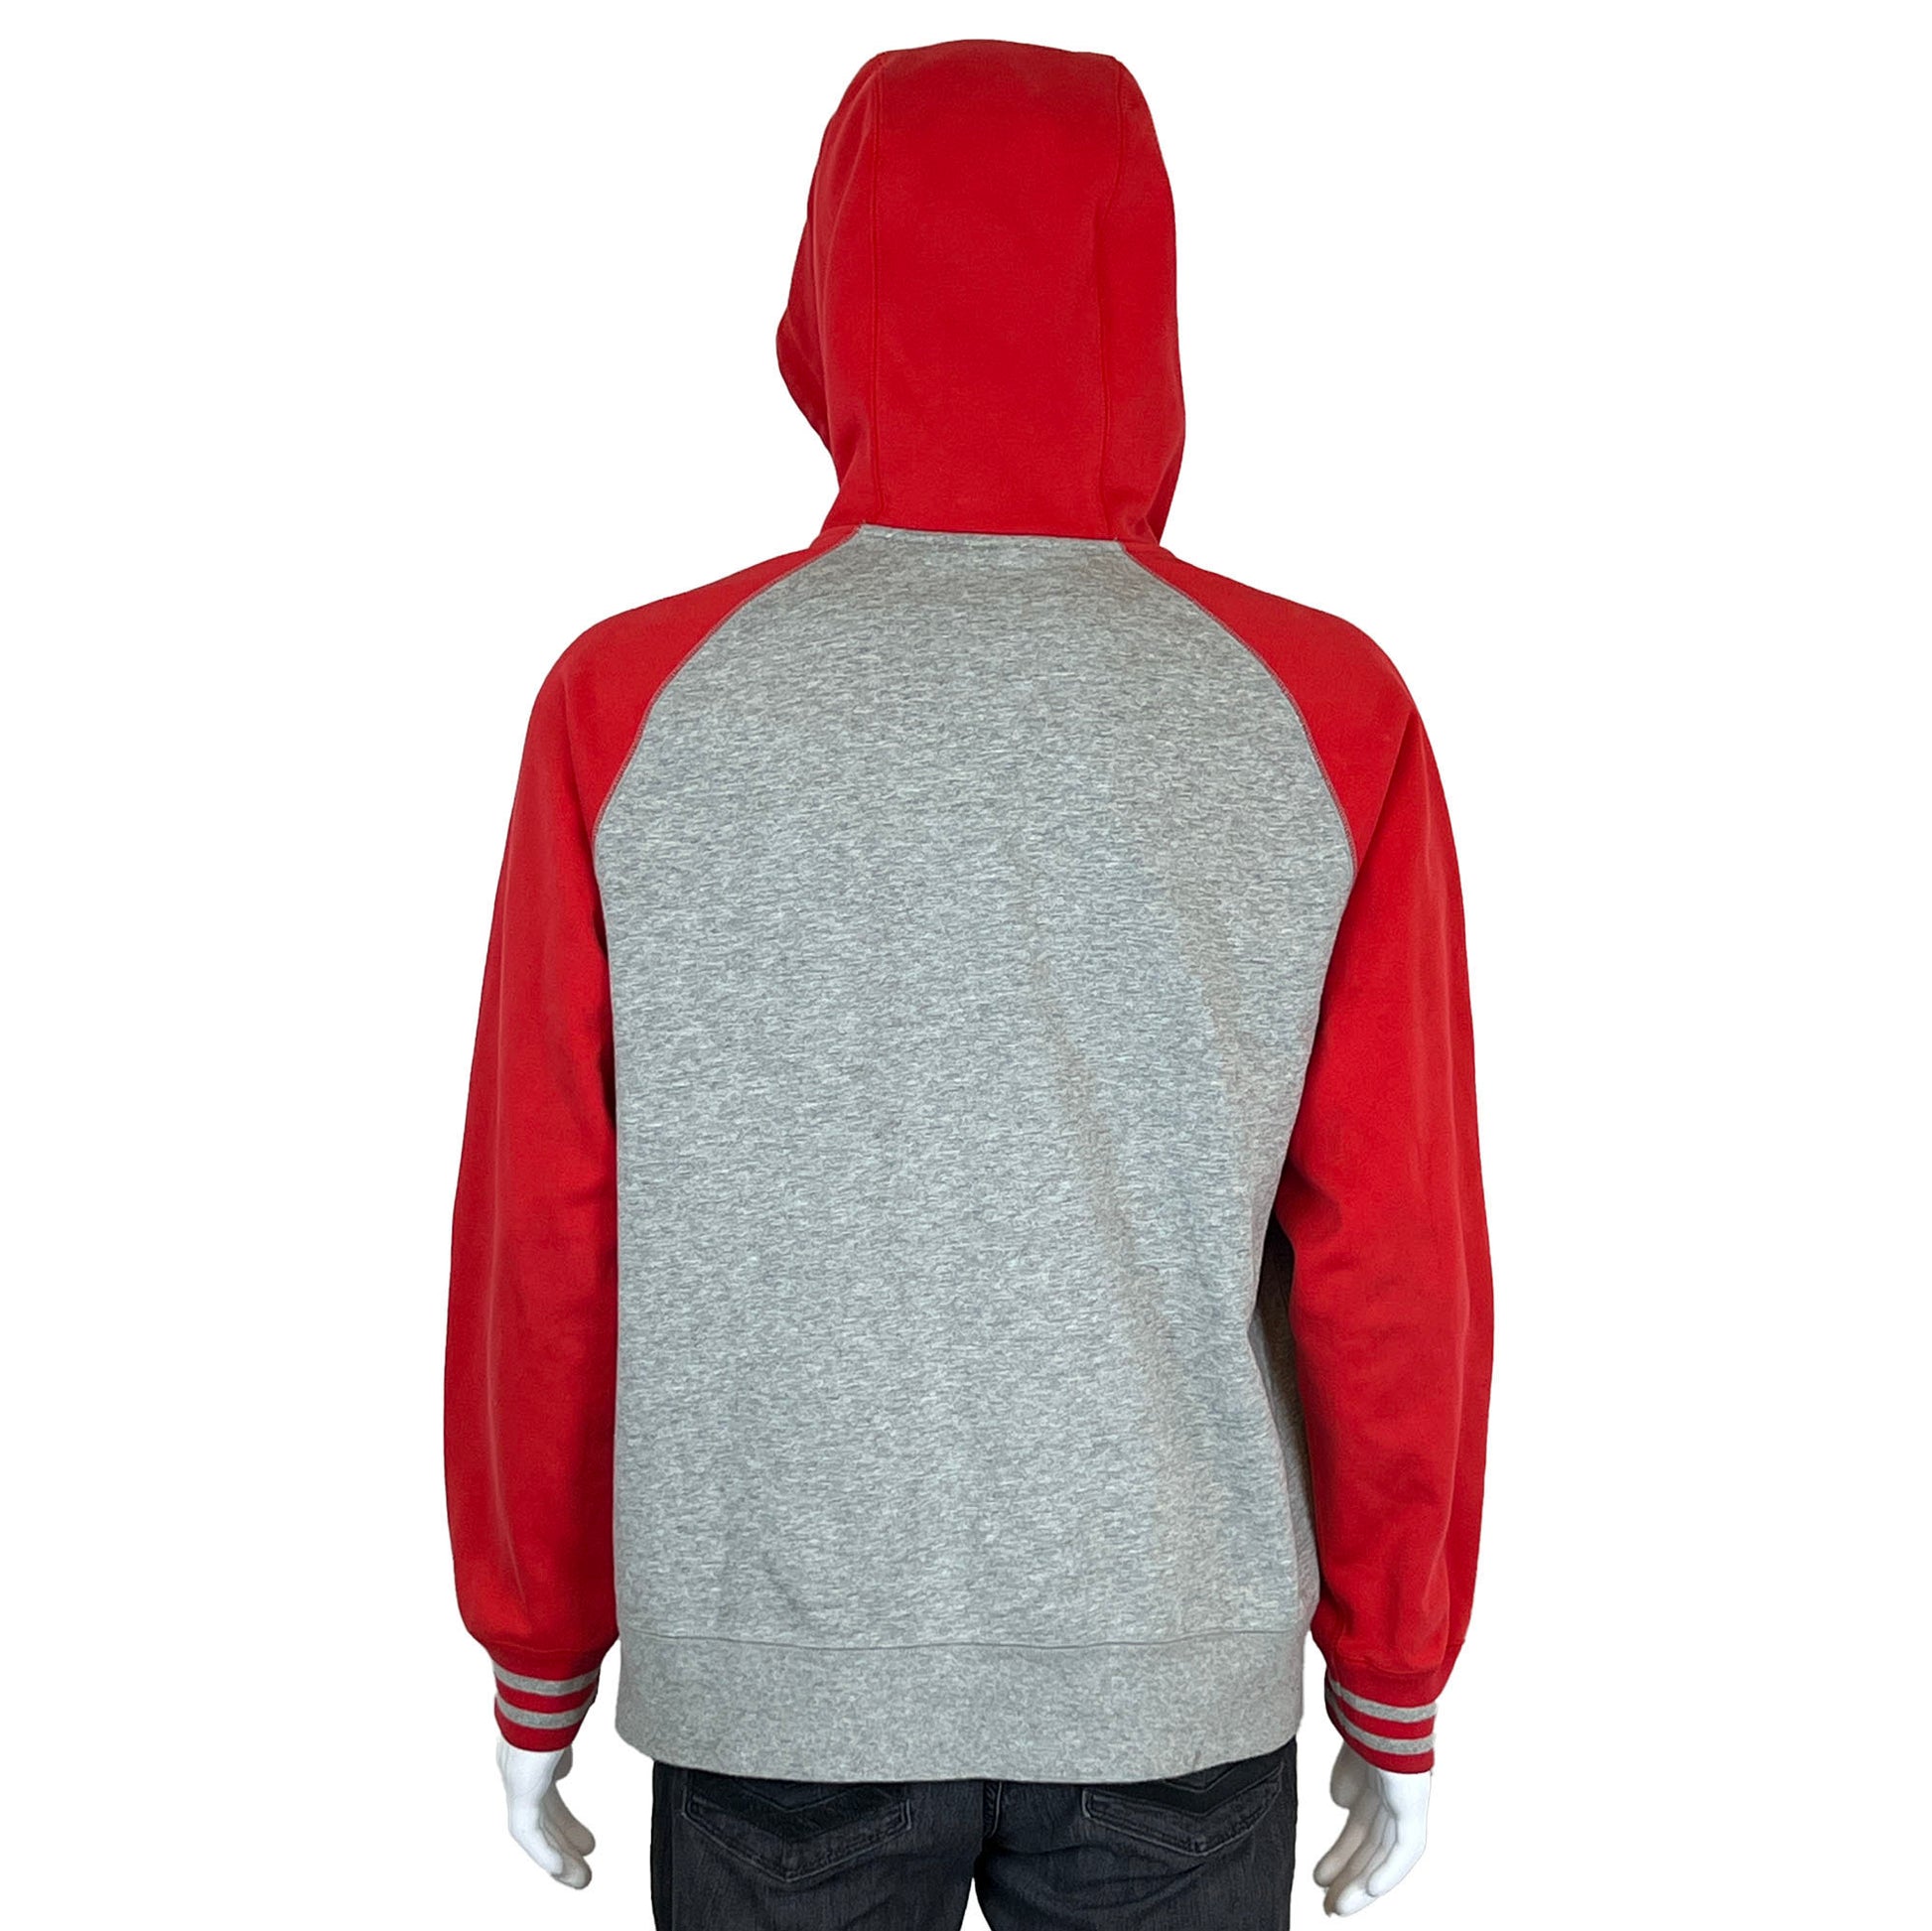 Nike-Air-Red-and-Gray-Zip-Hoodie-Jacket.-Back-view.-Shop-eBargainsAndDeals.com